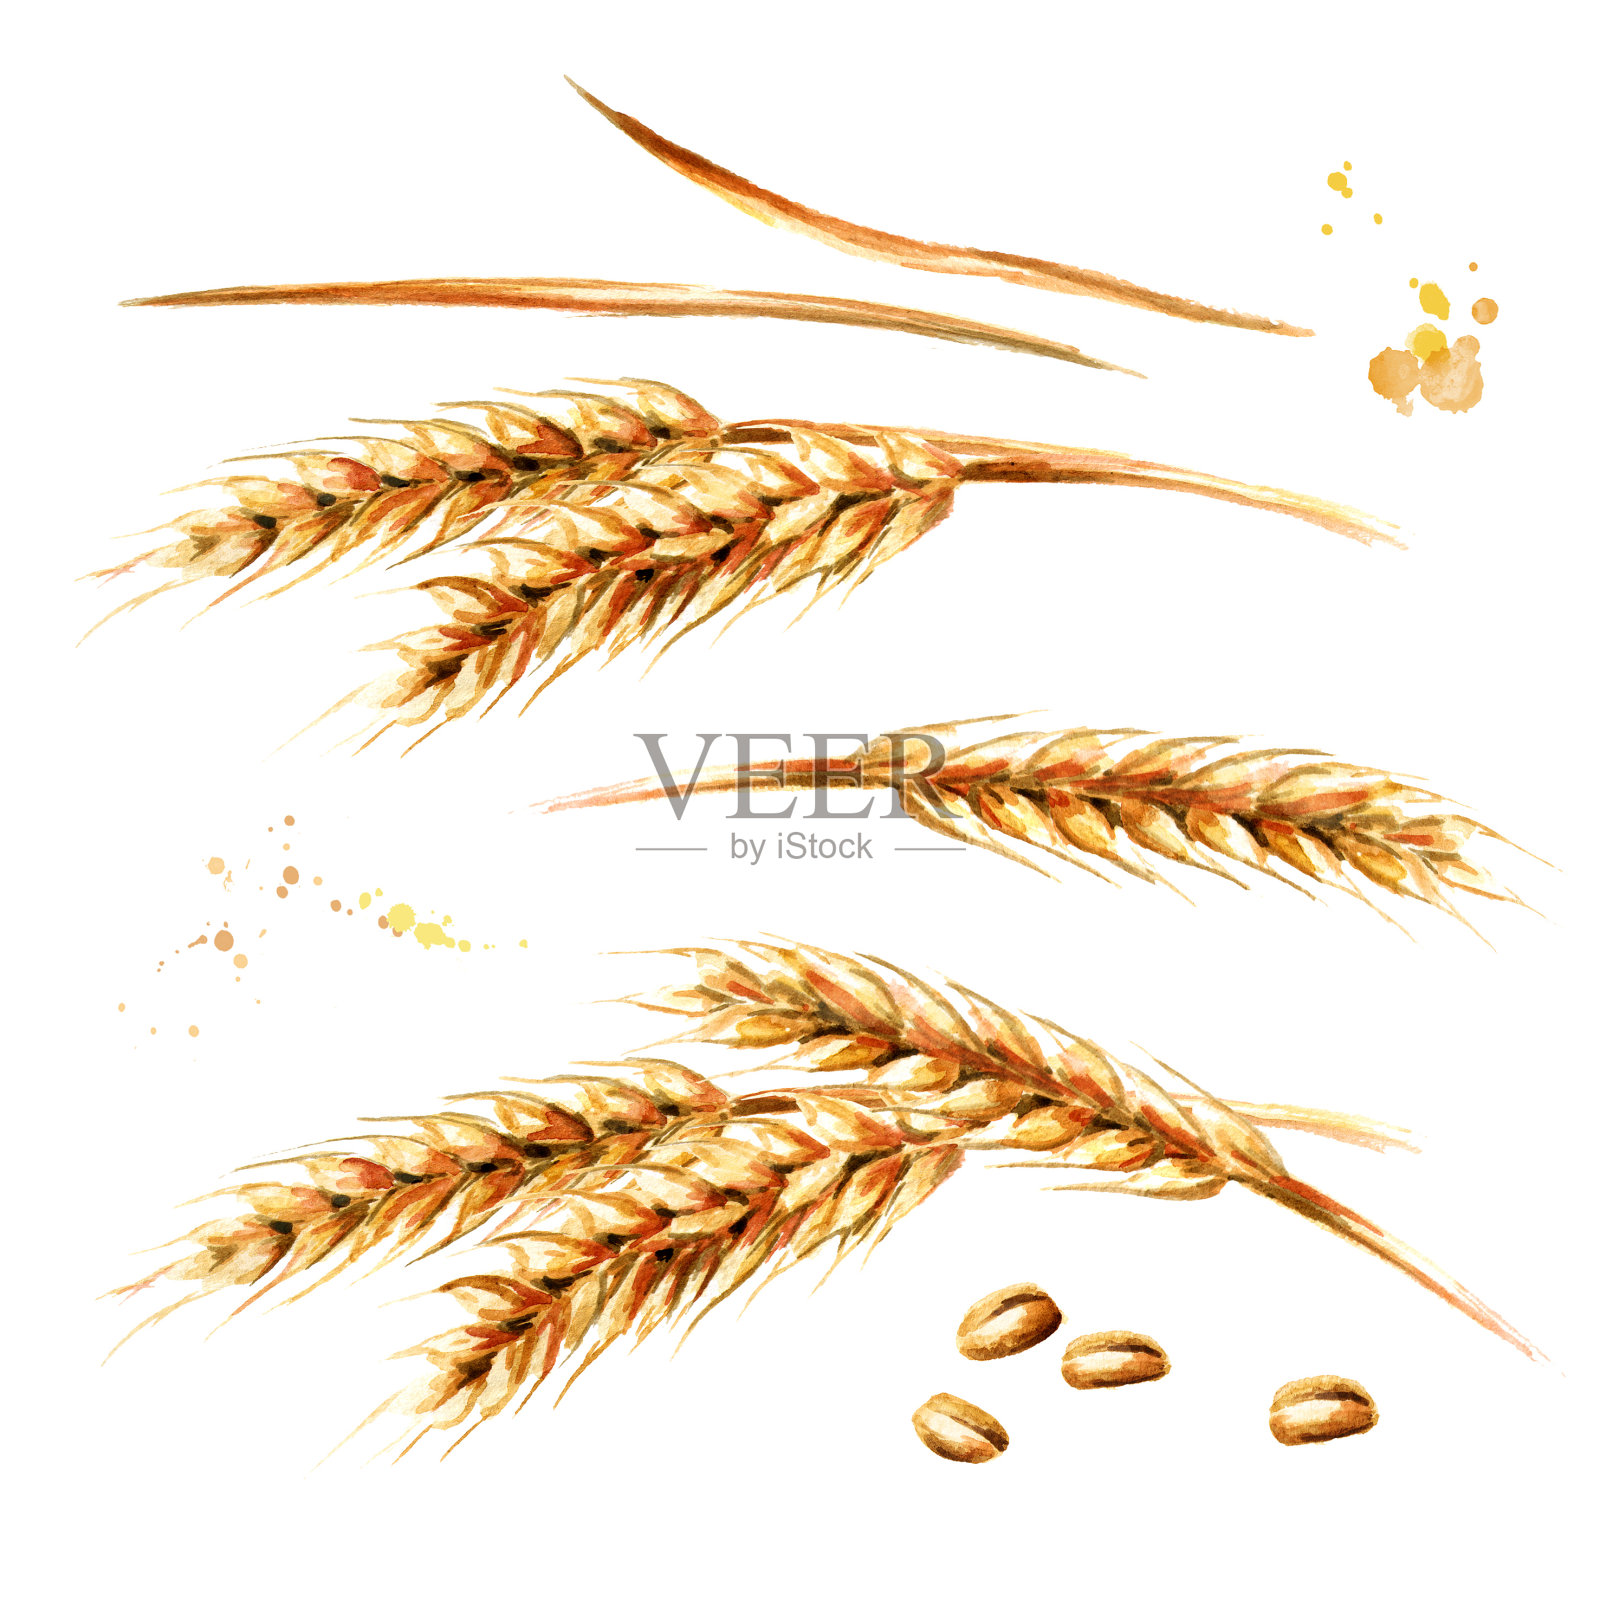 Ears of wheat  set. Watercolor hand drawn illustration, isolated on white background插画图片素材